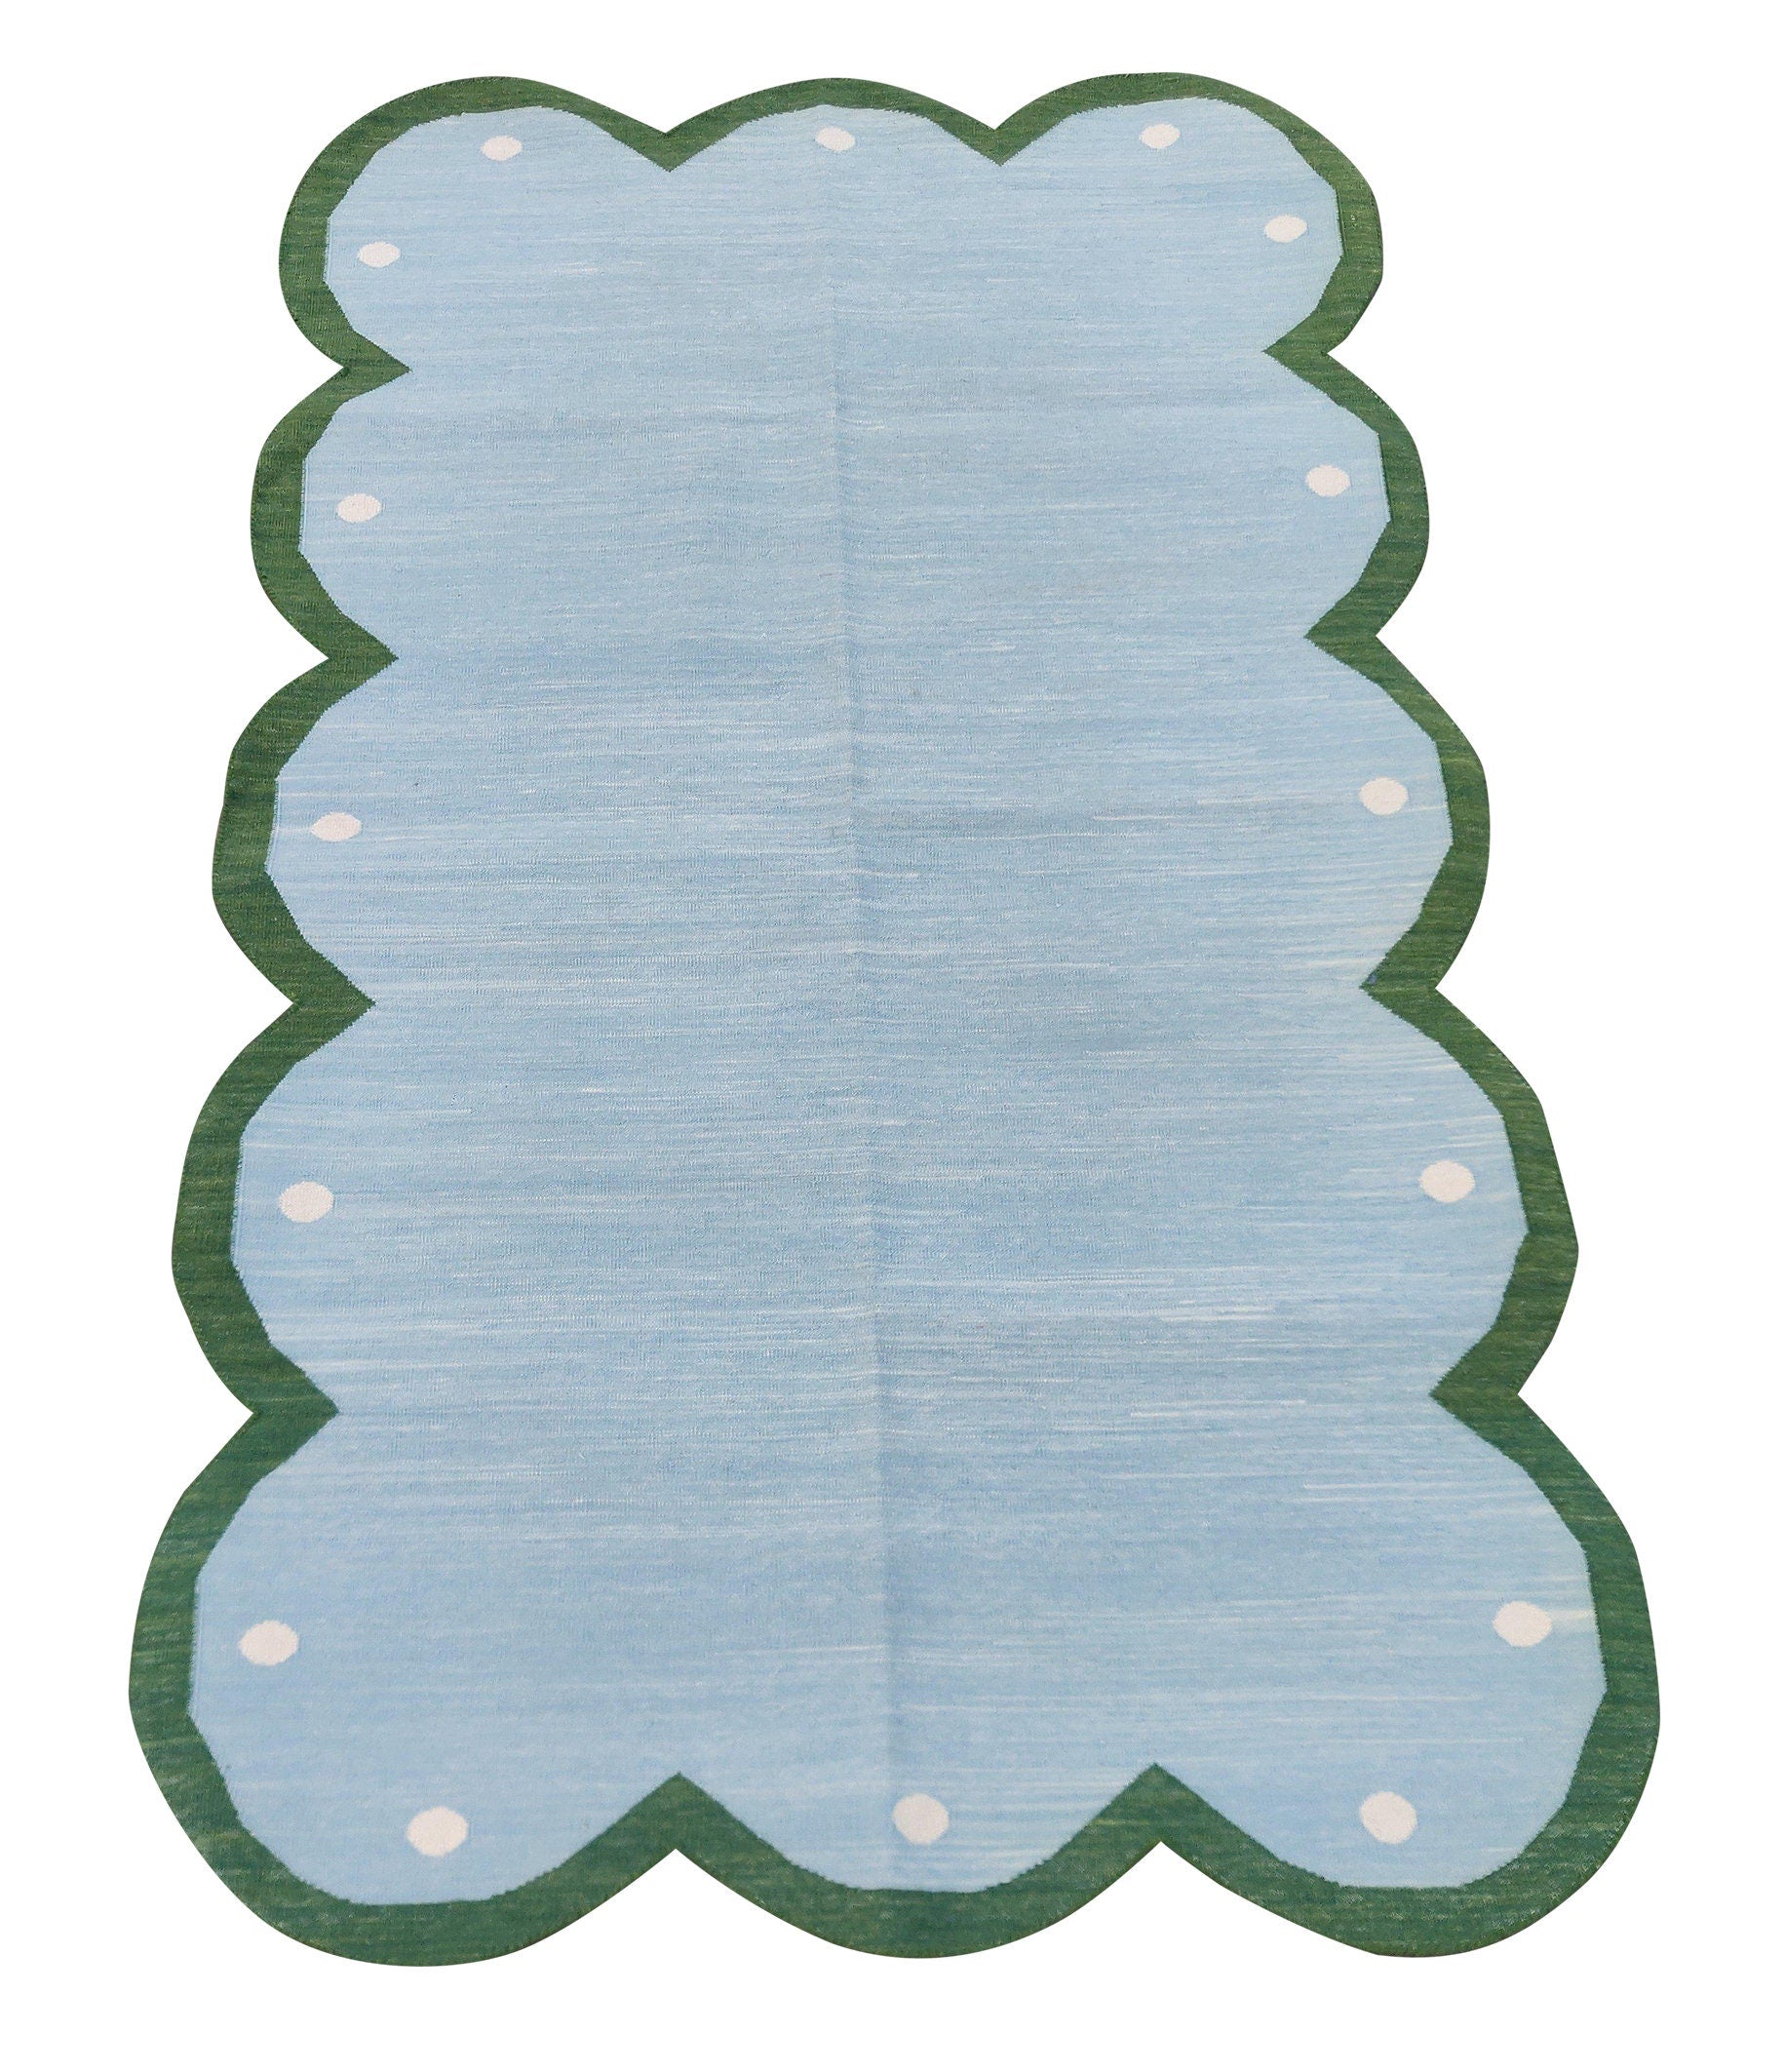 Handmade Cotton Area Flat Weave Rug, Blue & Green Scalloped Edge Indian Dhurrie